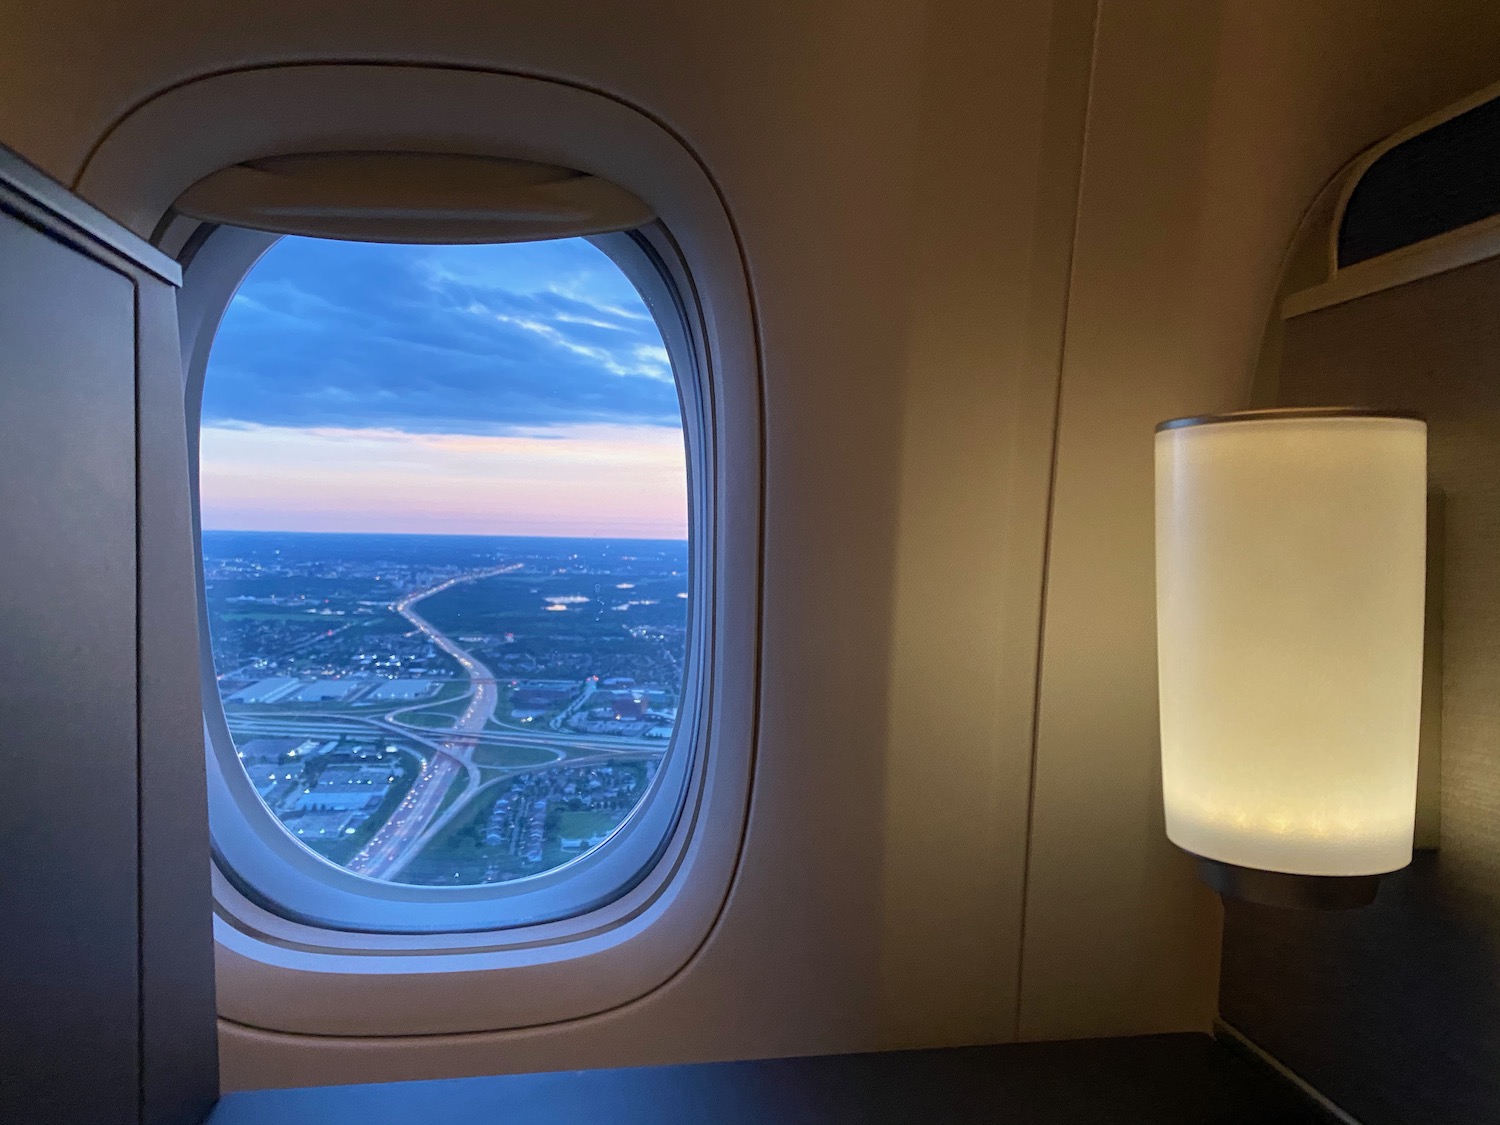 a window of an airplane with a view of a city